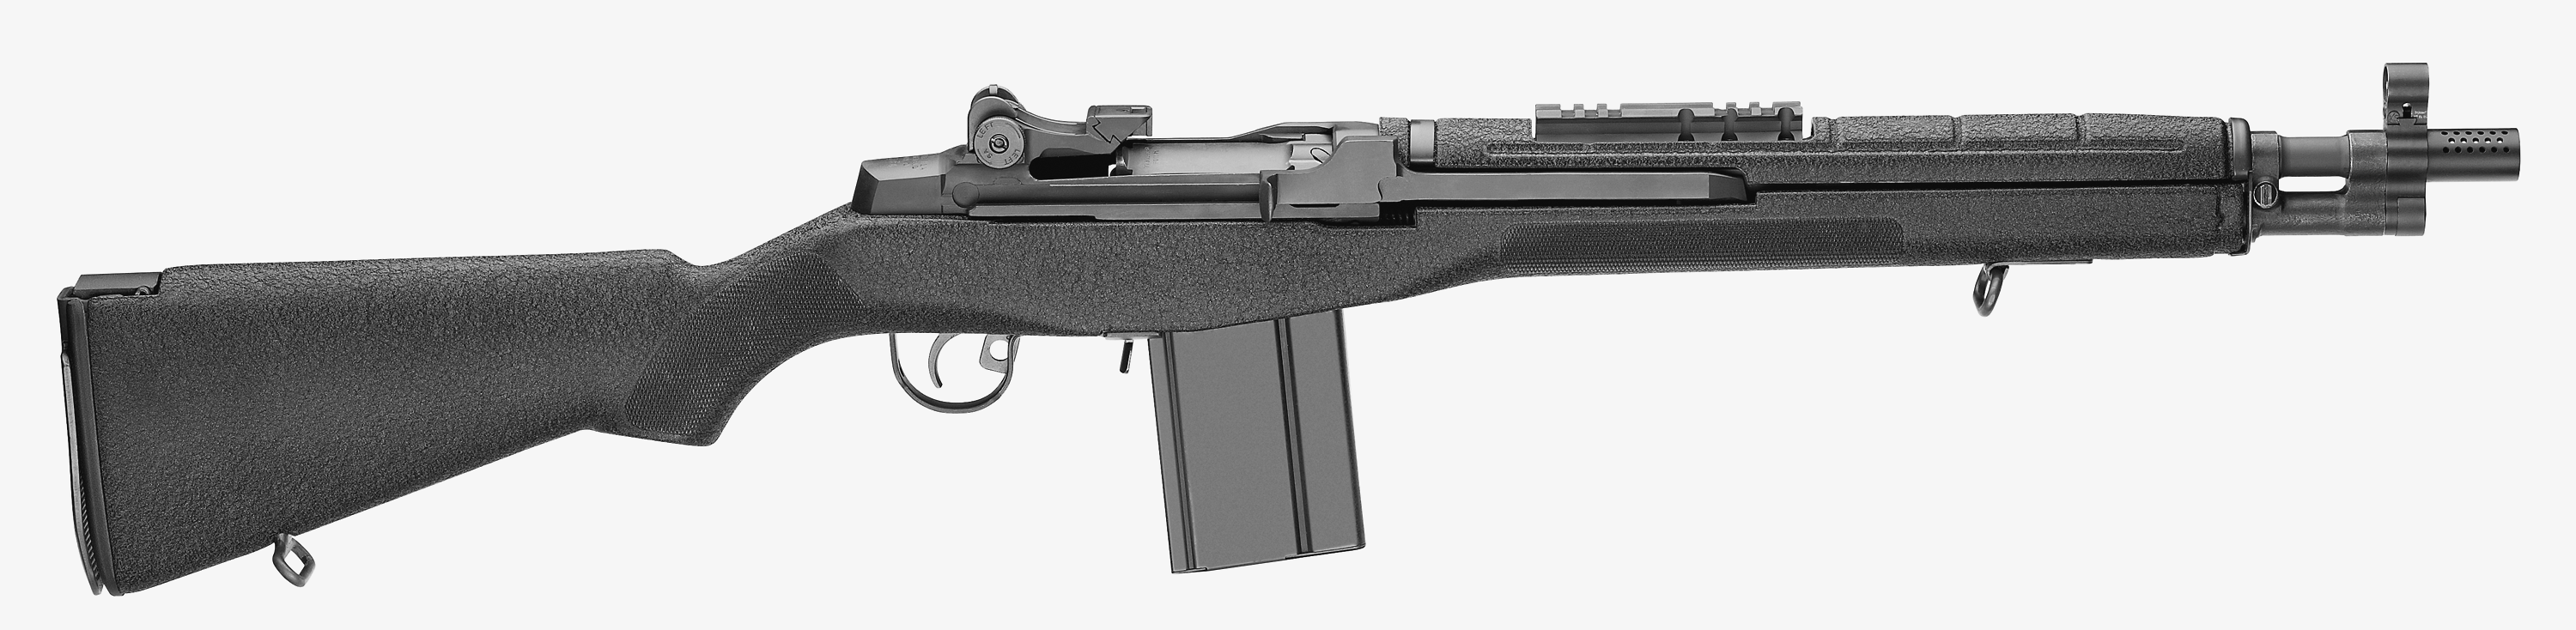 This M1A1 rifle features 16.25-in. barrel, with muzzle-brake. 